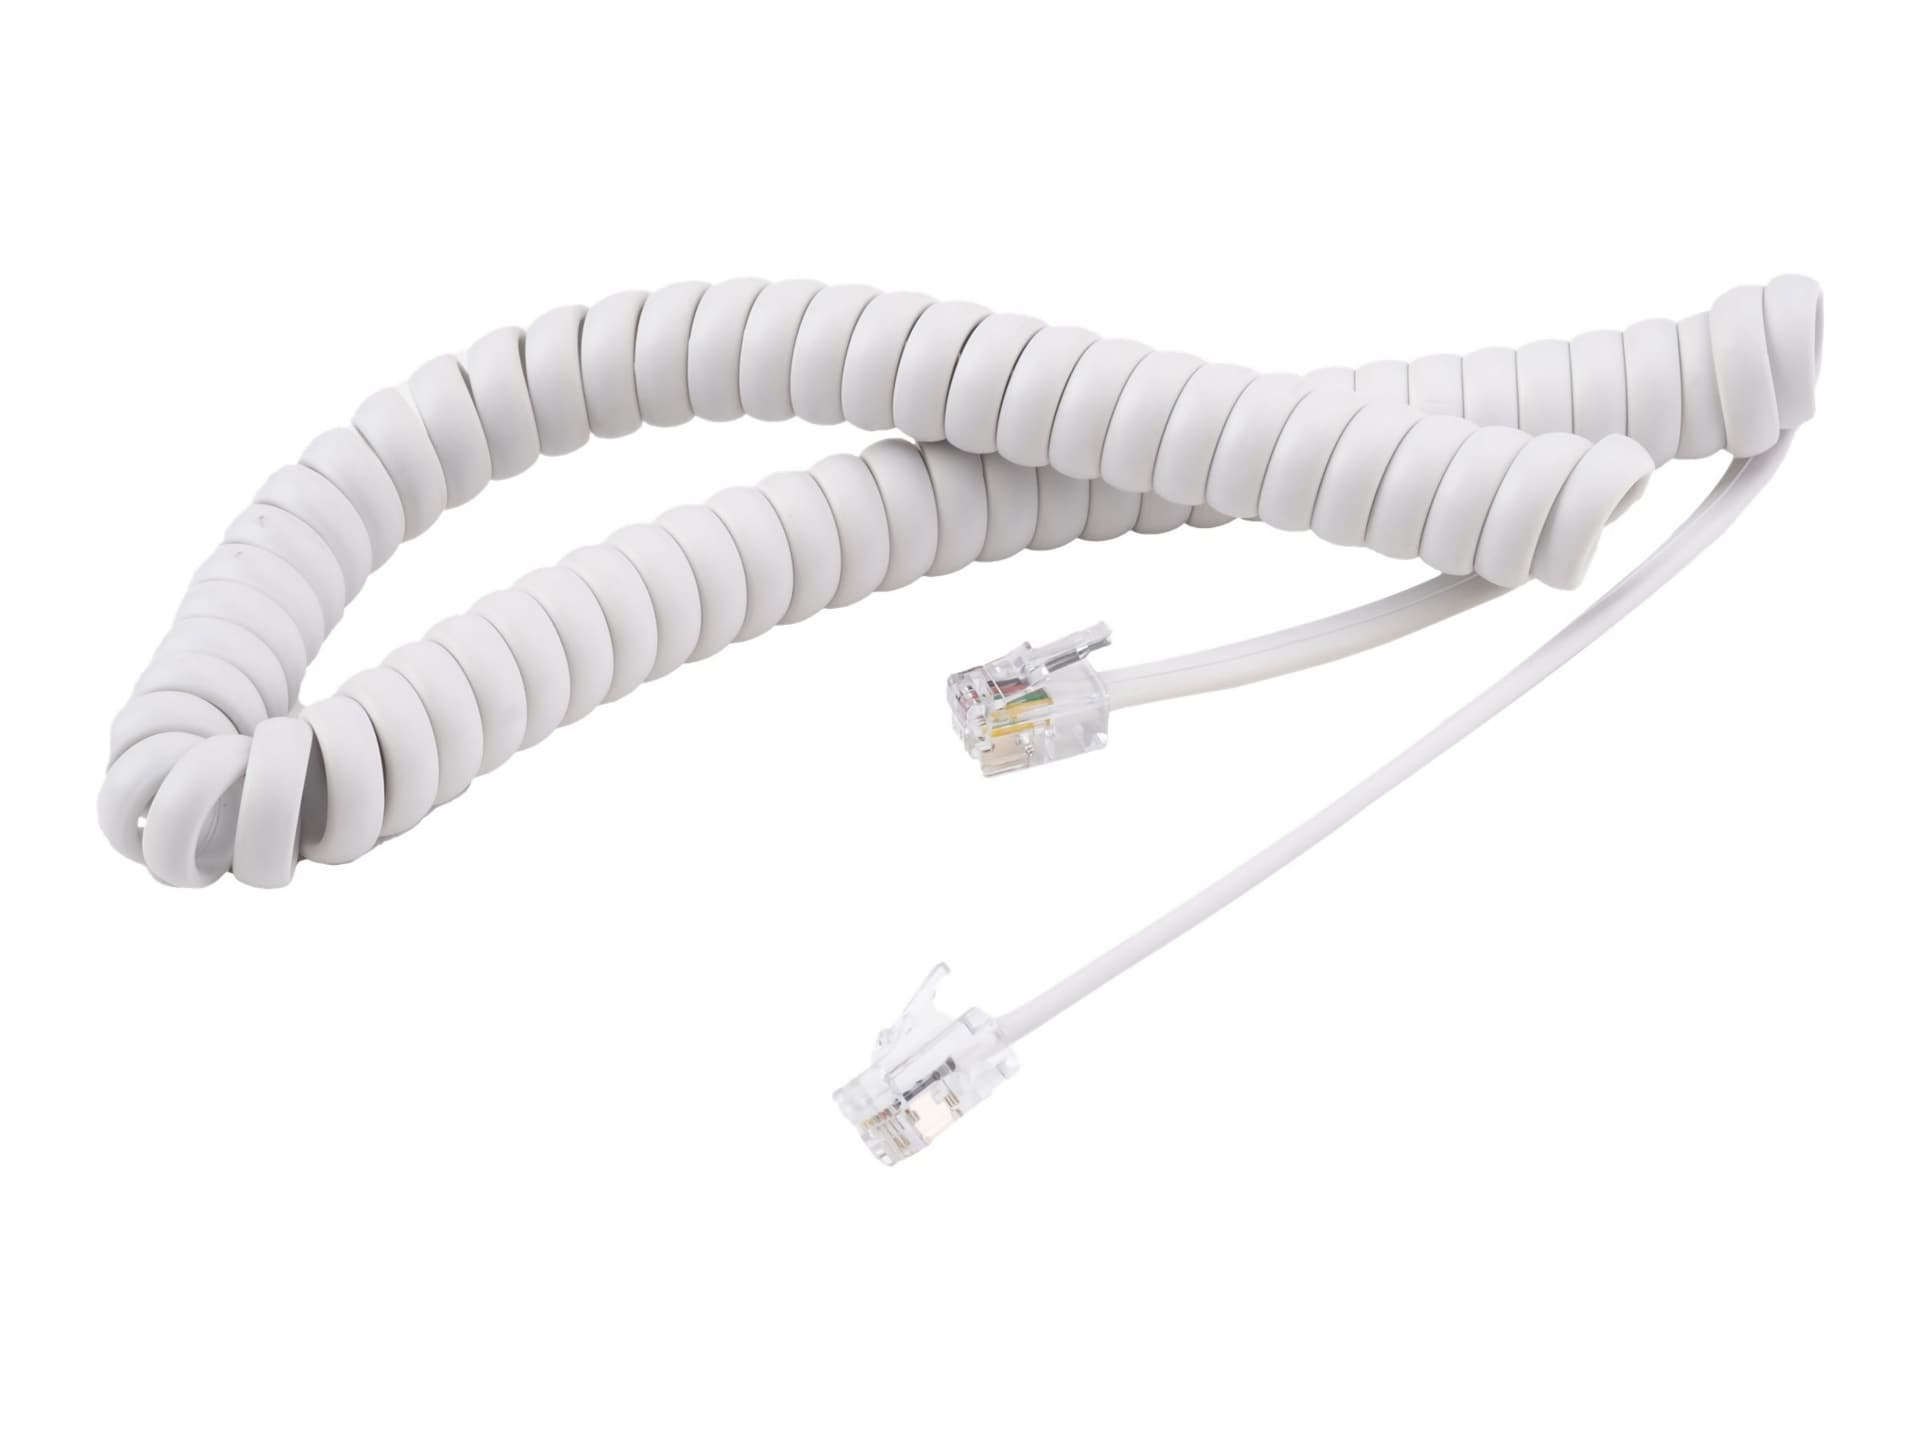 Cisco handset cable